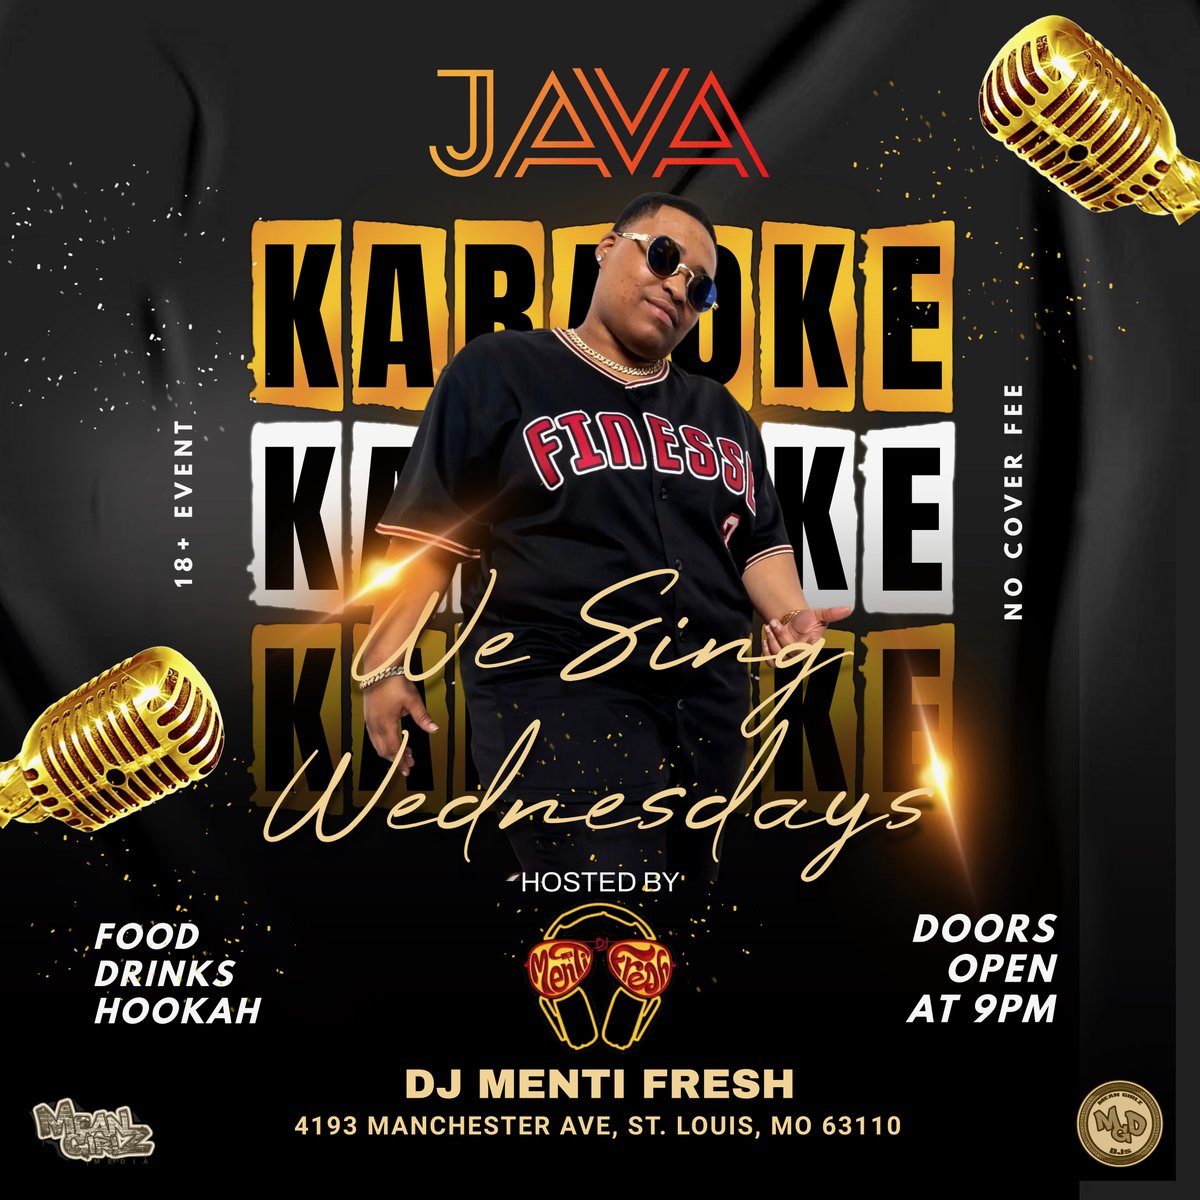 🎤 Microphone check, one, two! It's Wednesday, and that means it's time to shine at karaoke night. DJ Menti Fresh is spinning your favorite tracks, so grab the mic and let your inner rockstar loose! 🎶🎤 #WeSingWednesdays #KaraokeLife